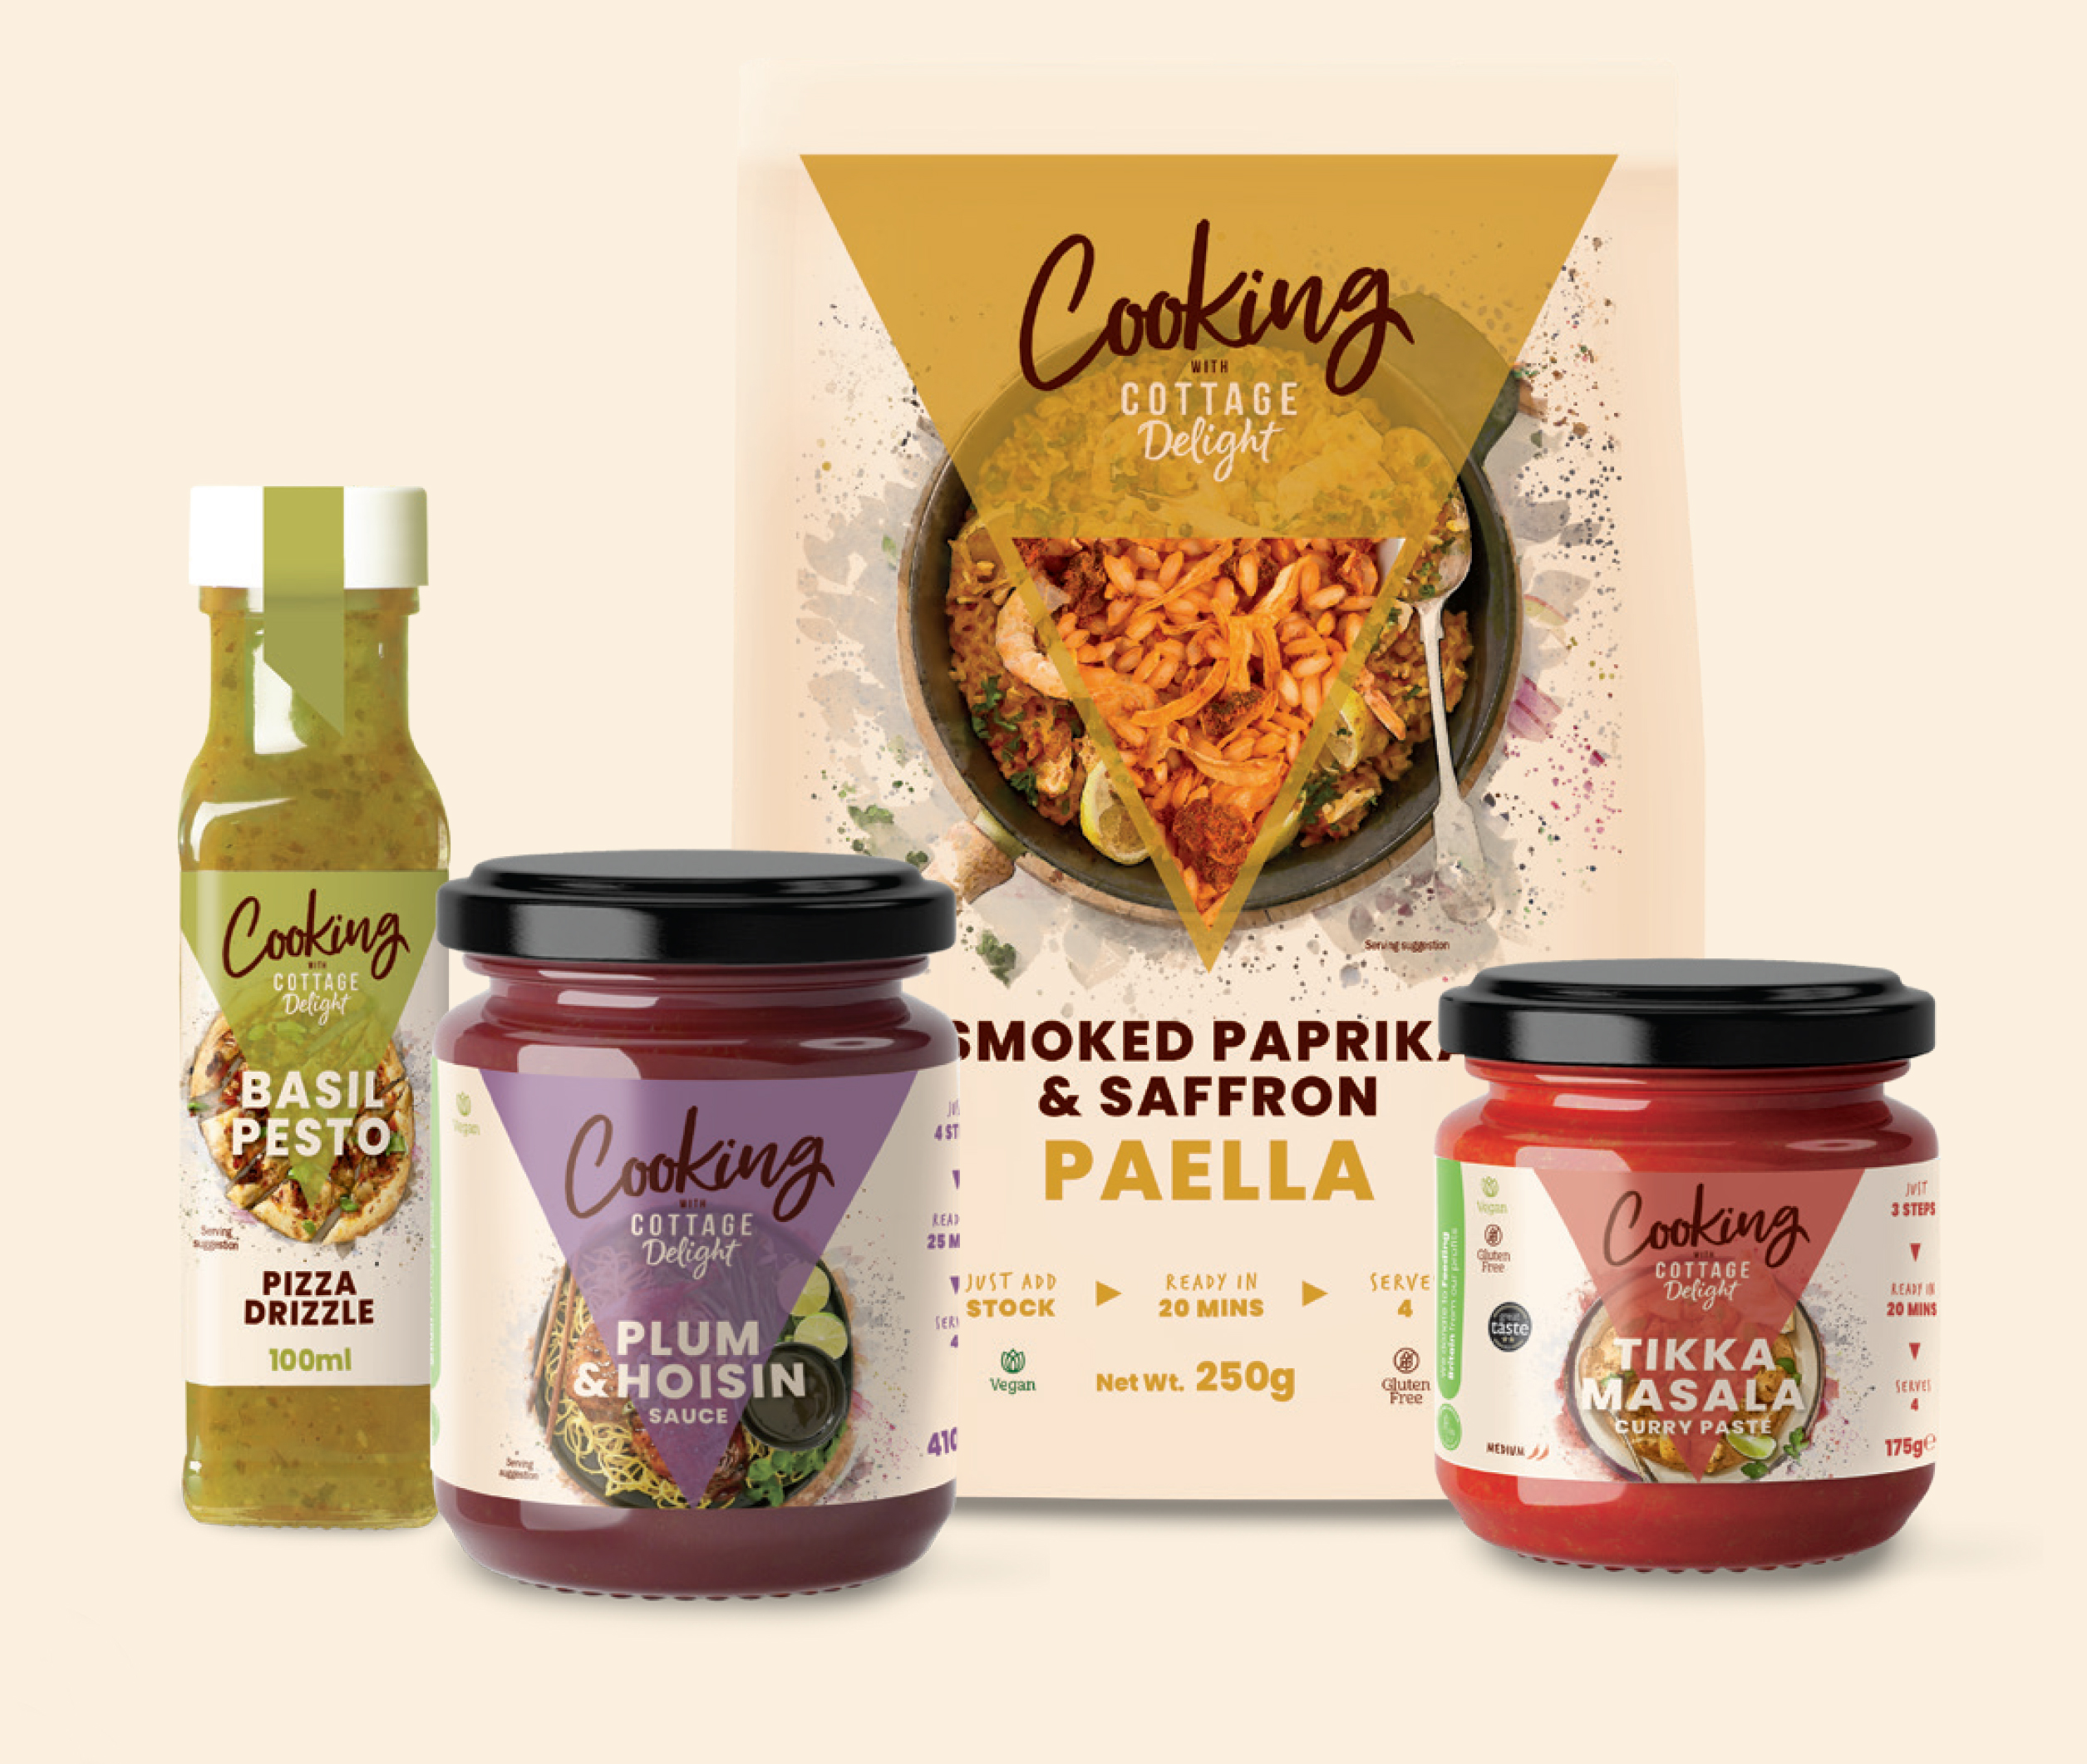 Cottage Delight’s new ‘Cooking With’ range – designed for convenience